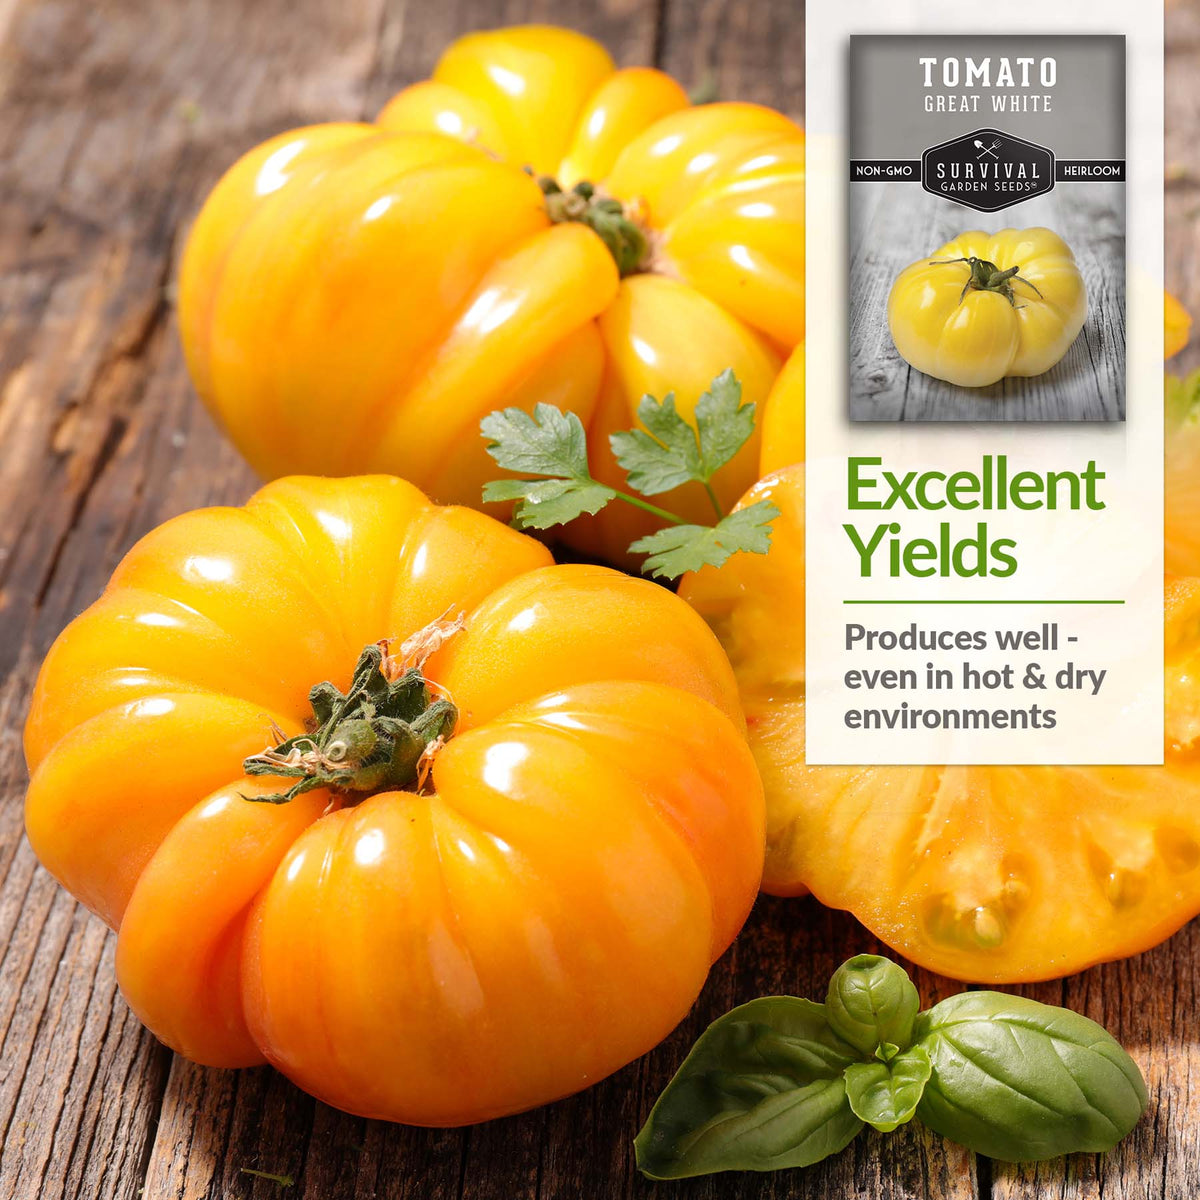 Great White Tomatoes grow well in hot and dry environments